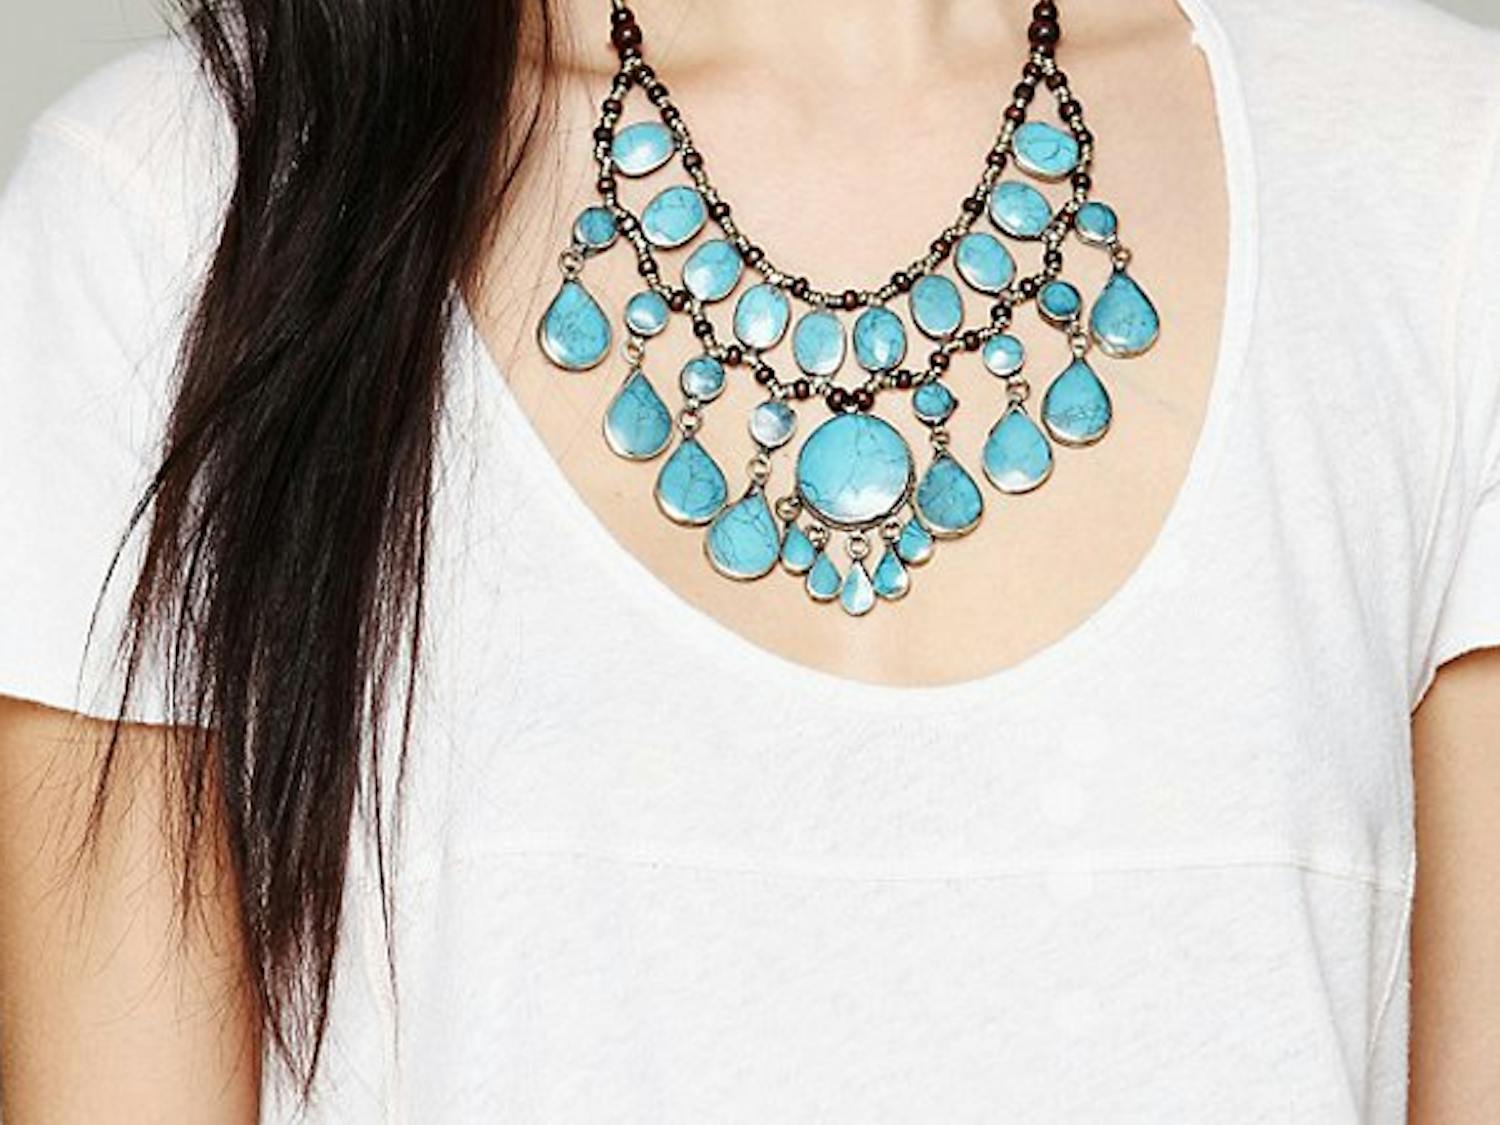 Wear a bold necklace to make a plain white t-shirt stand out. Photo courtesy Free People

